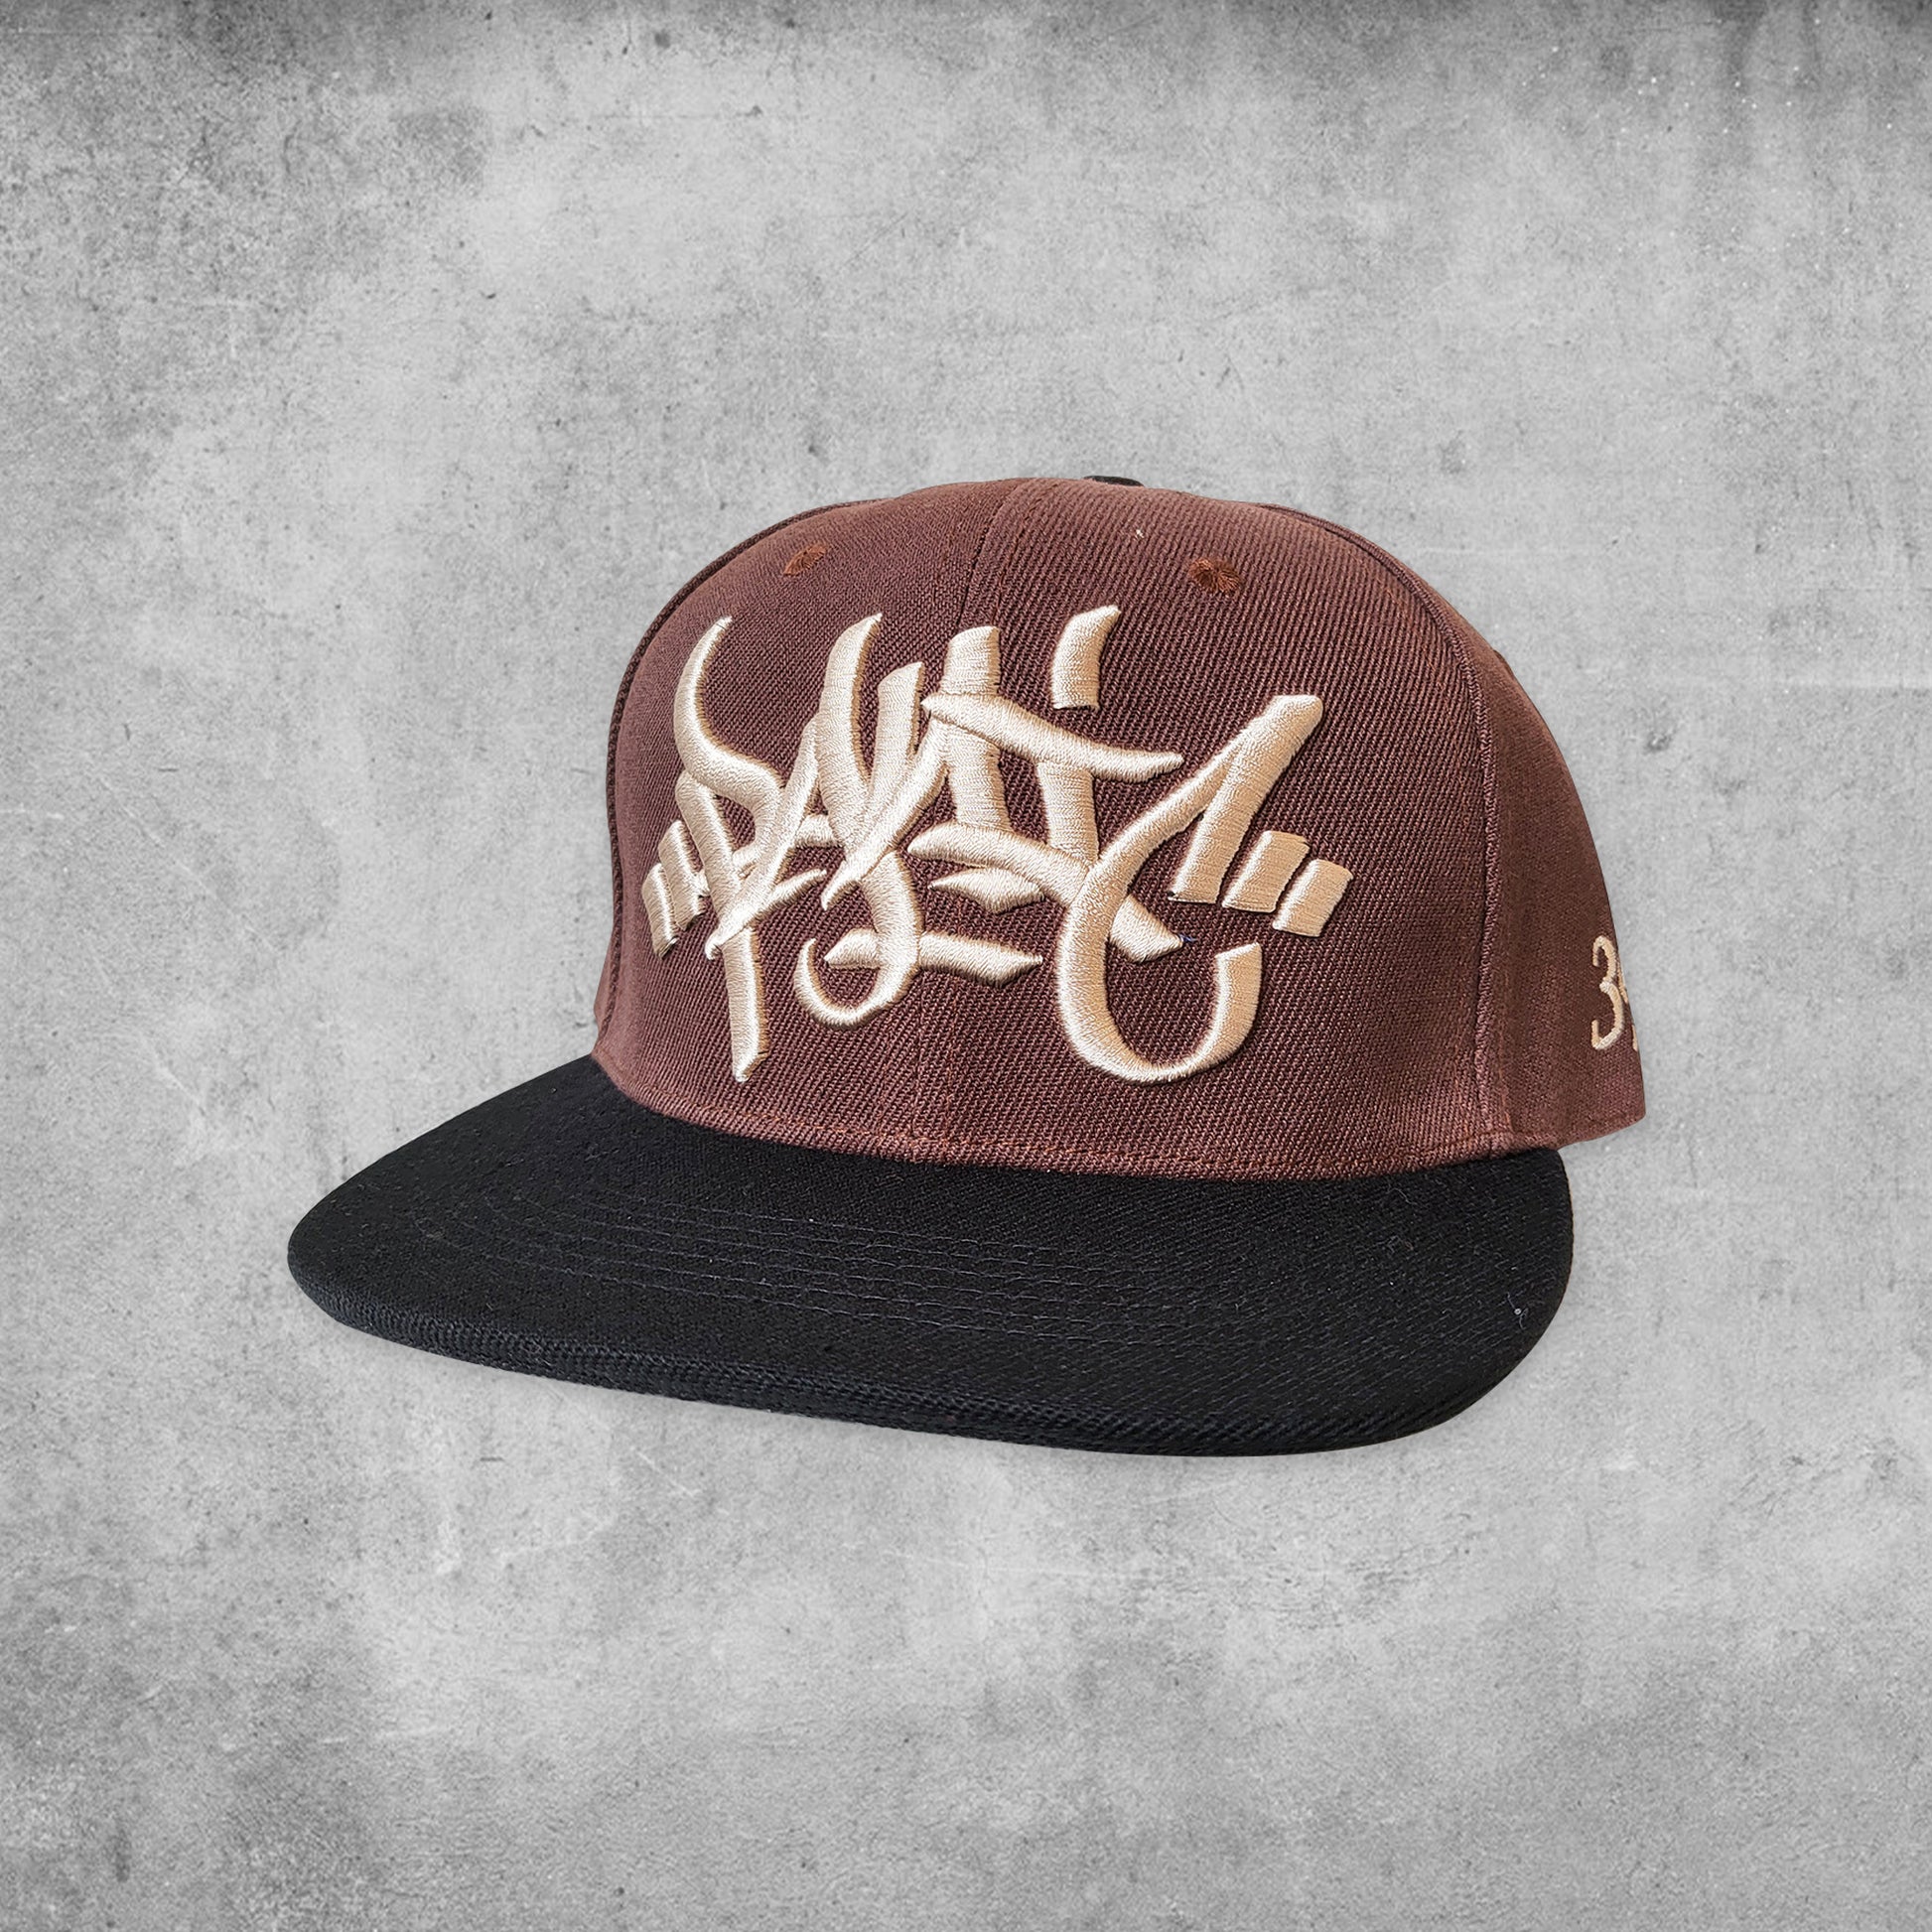 Panic 39 branded snap back hat in brown with cream puff embroidery.